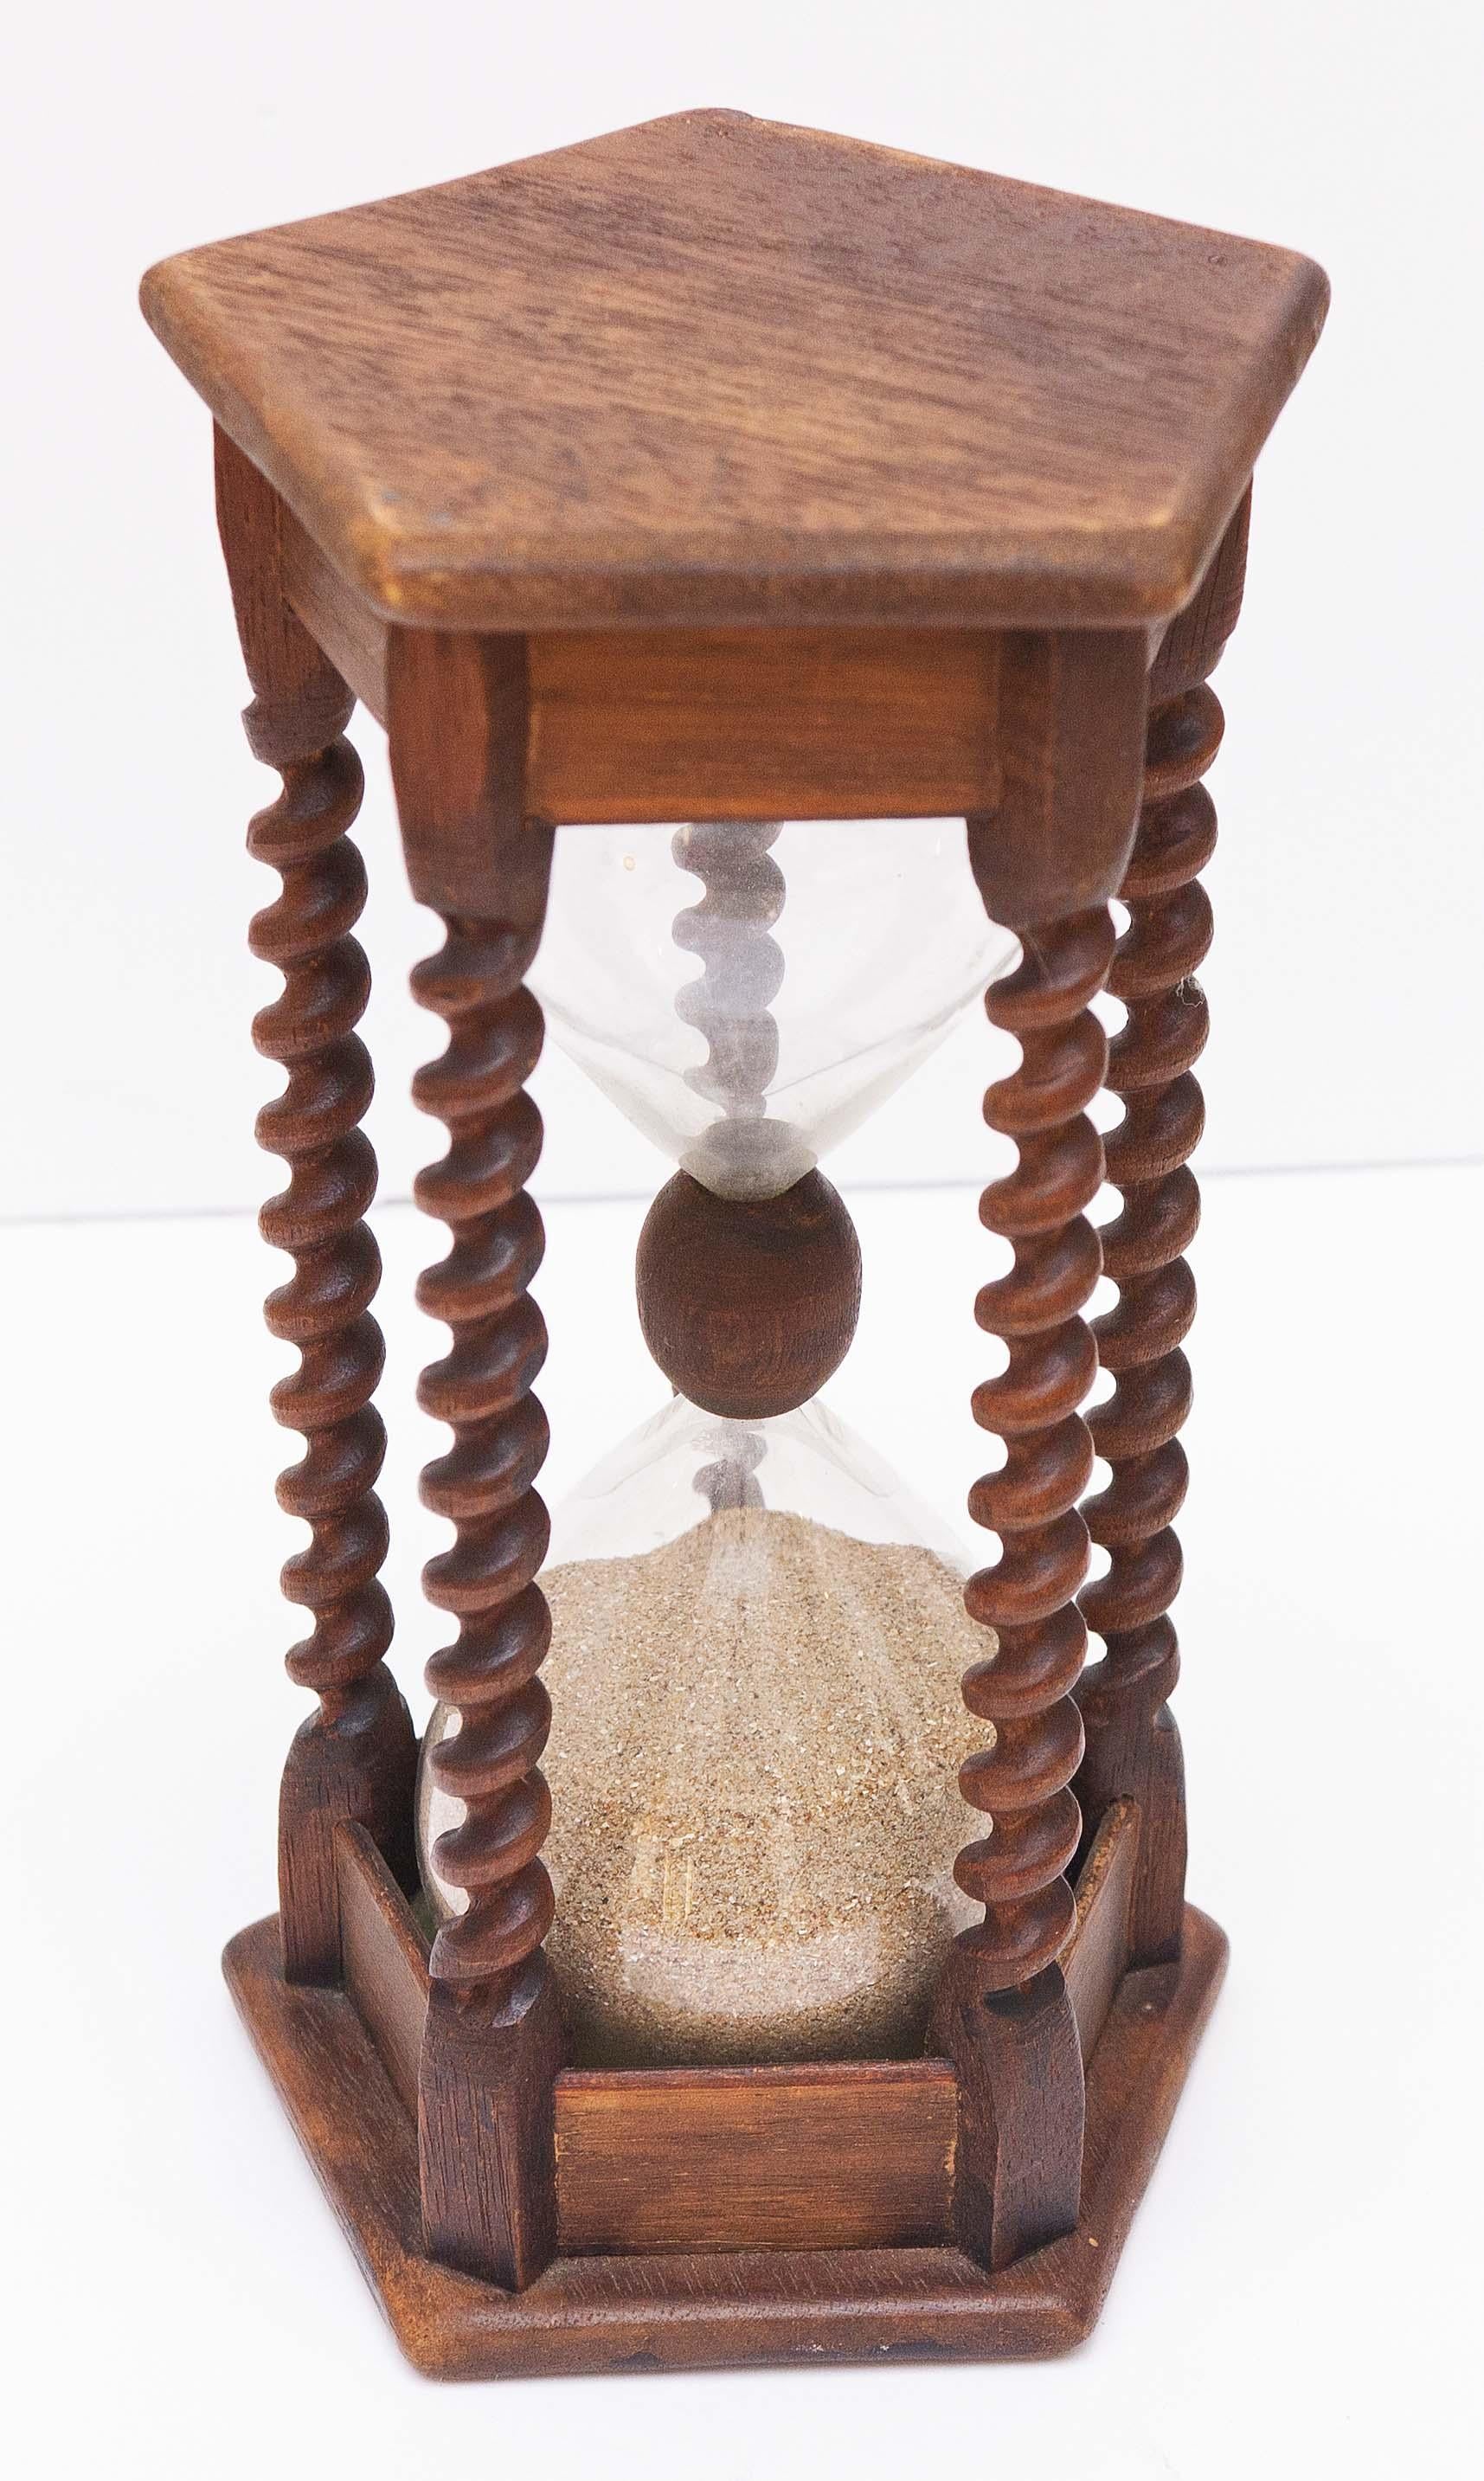 Turned column hourglass. Early 20th century.